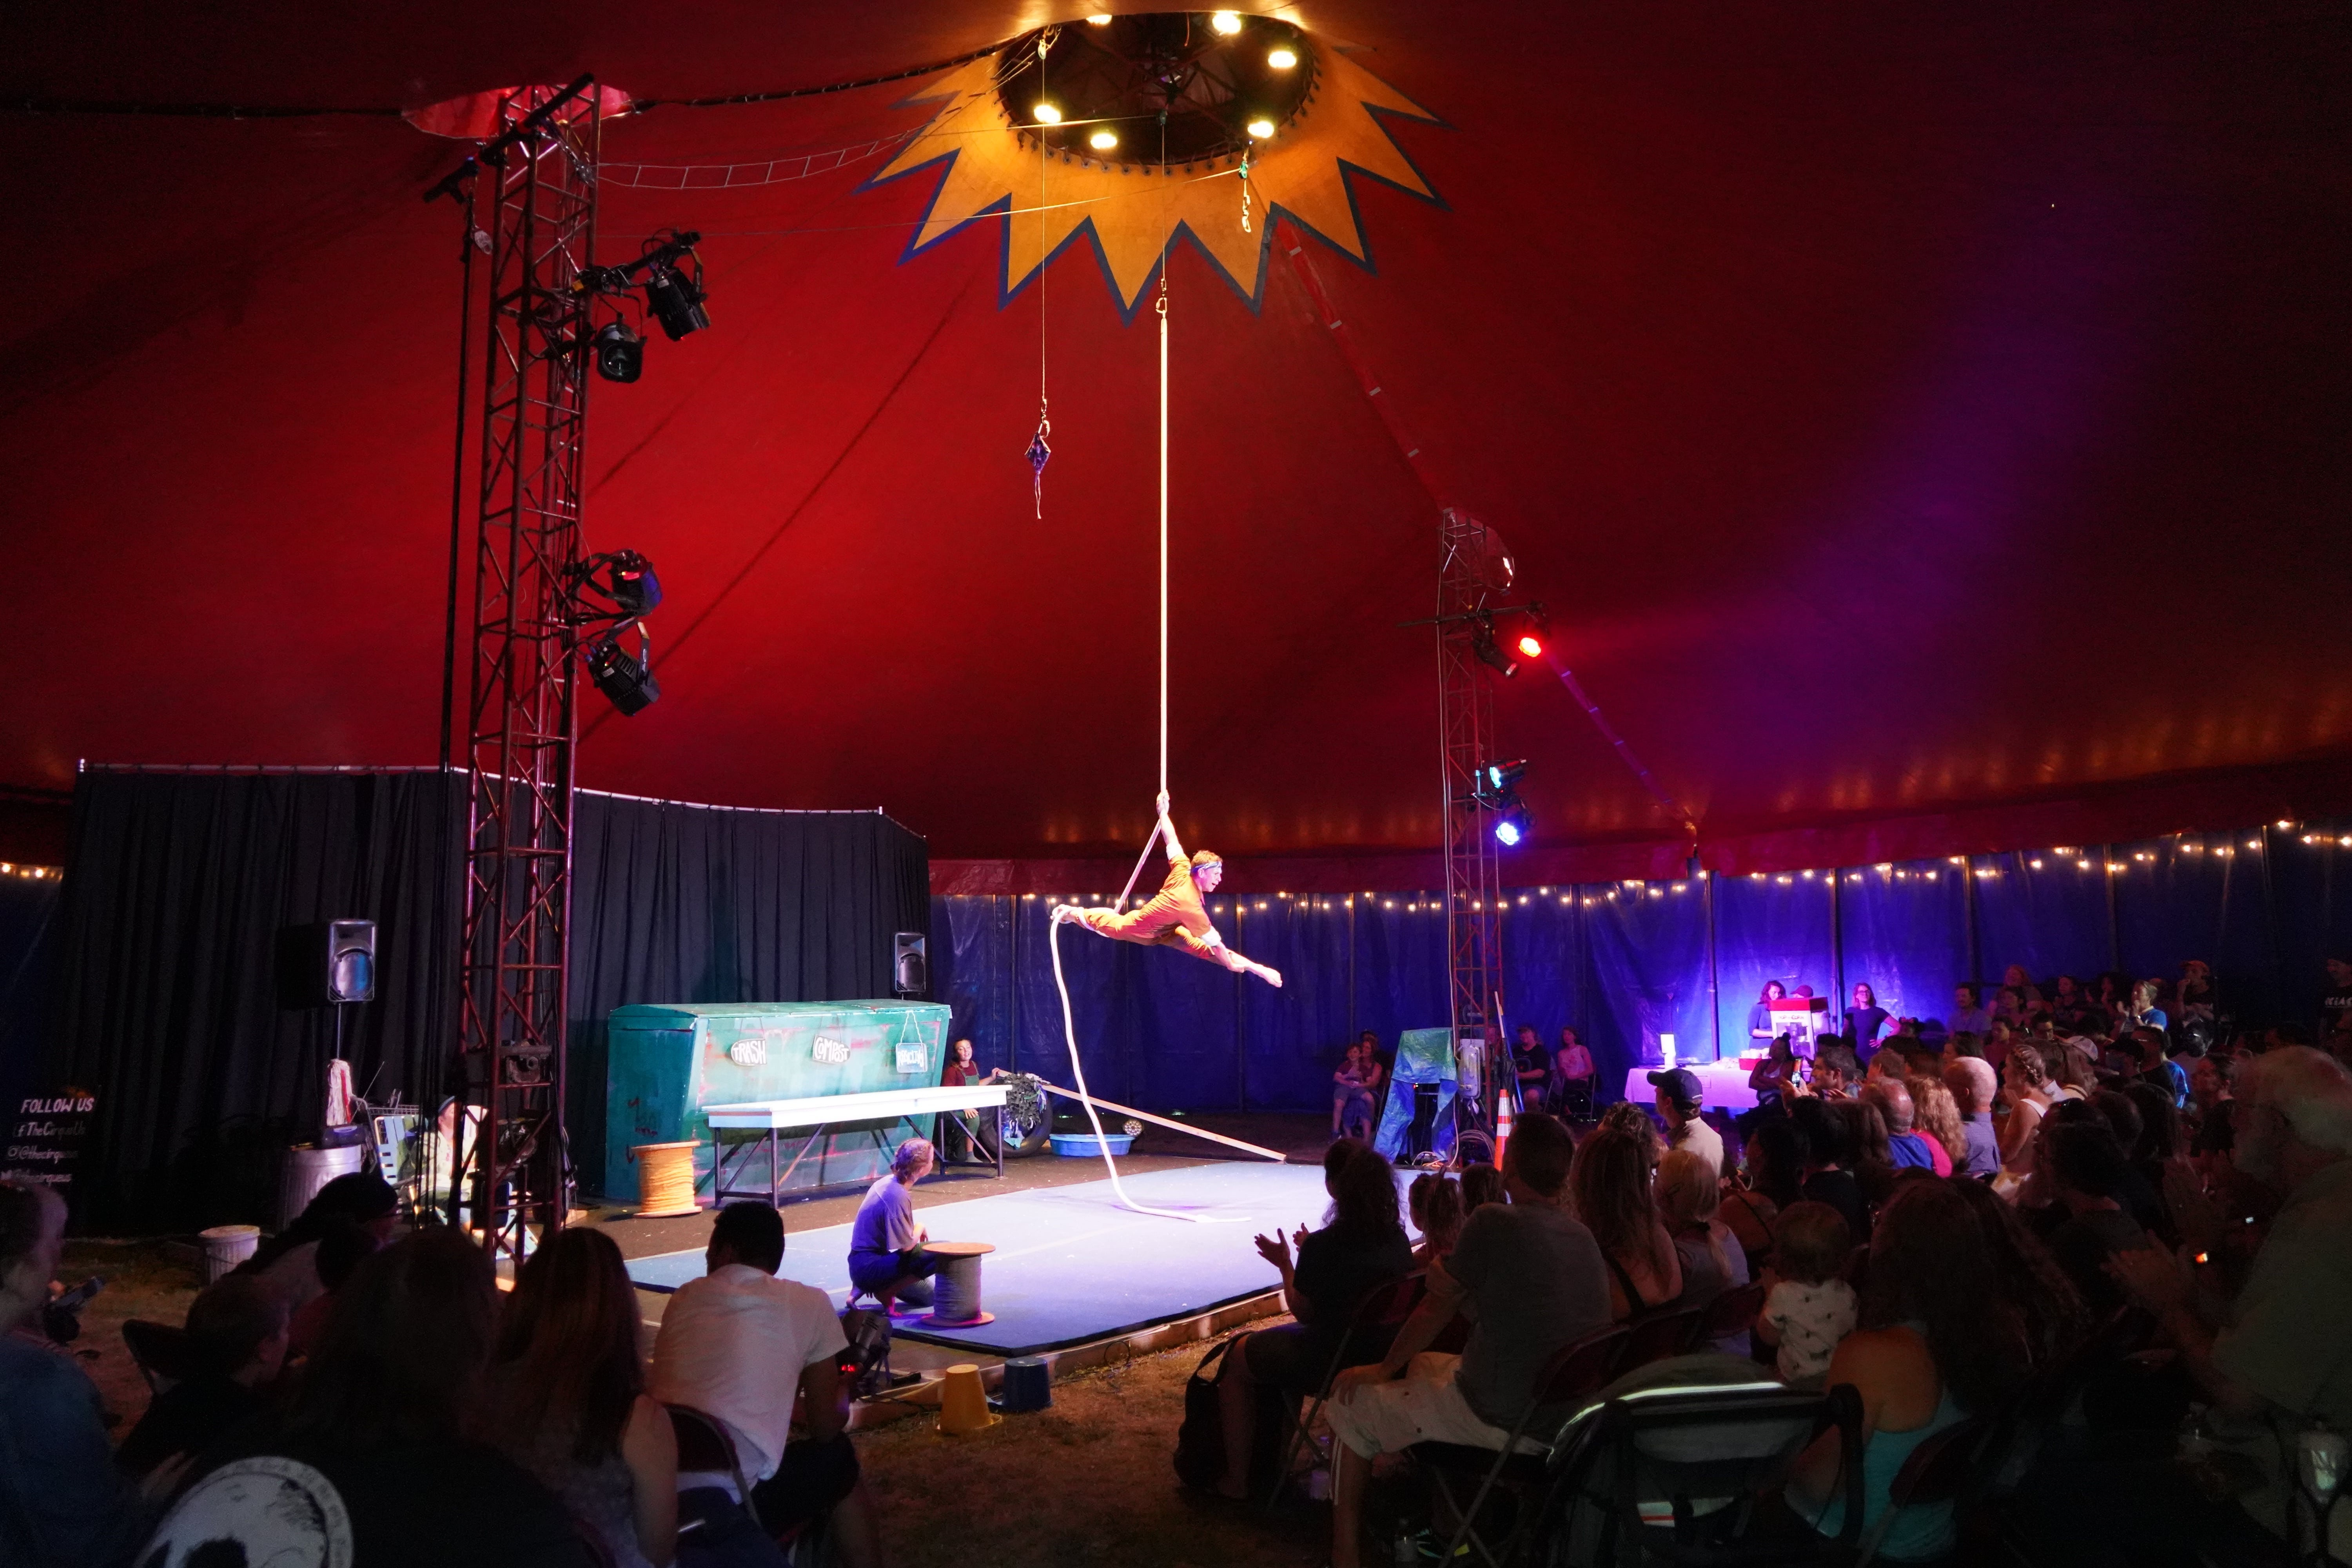 Aerialist and audience in CCIAC bigtop tent  in Troy's Prospect Park.